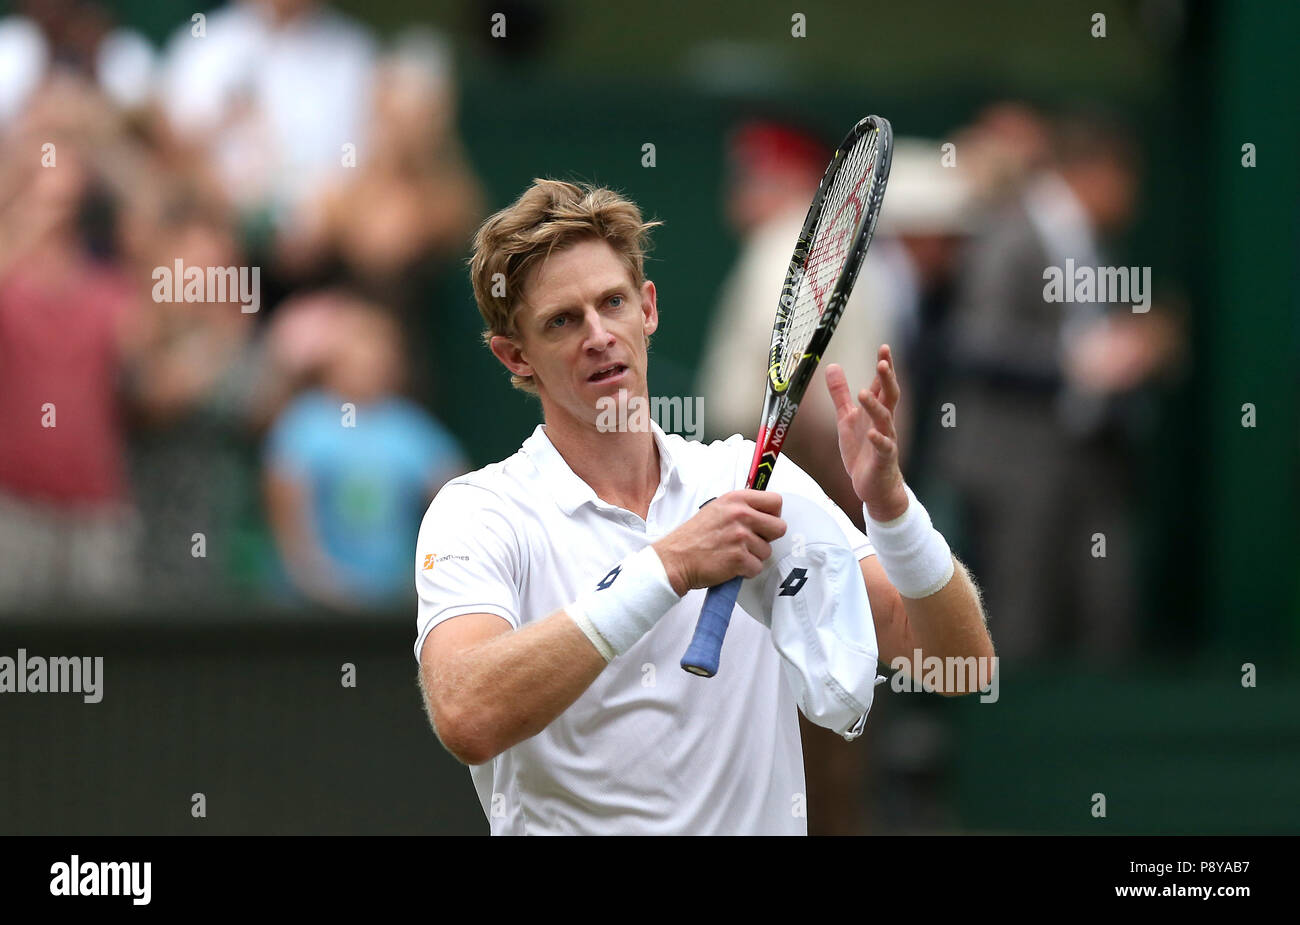 South African eighth seed Kevin Anderson celebrates having reached his first Wimbledon final, beating American ninth seed John Isner 7-6 (8/6) 6-7 (5/7) 6-7 (9/11) 6-4 26-24 in the longest semi-final in the tournamentâ€™s history on day eleven of the Wimbledon Championships at the All England Lawn Tennis and Croquet Club, Wimbledon. Stock Photo